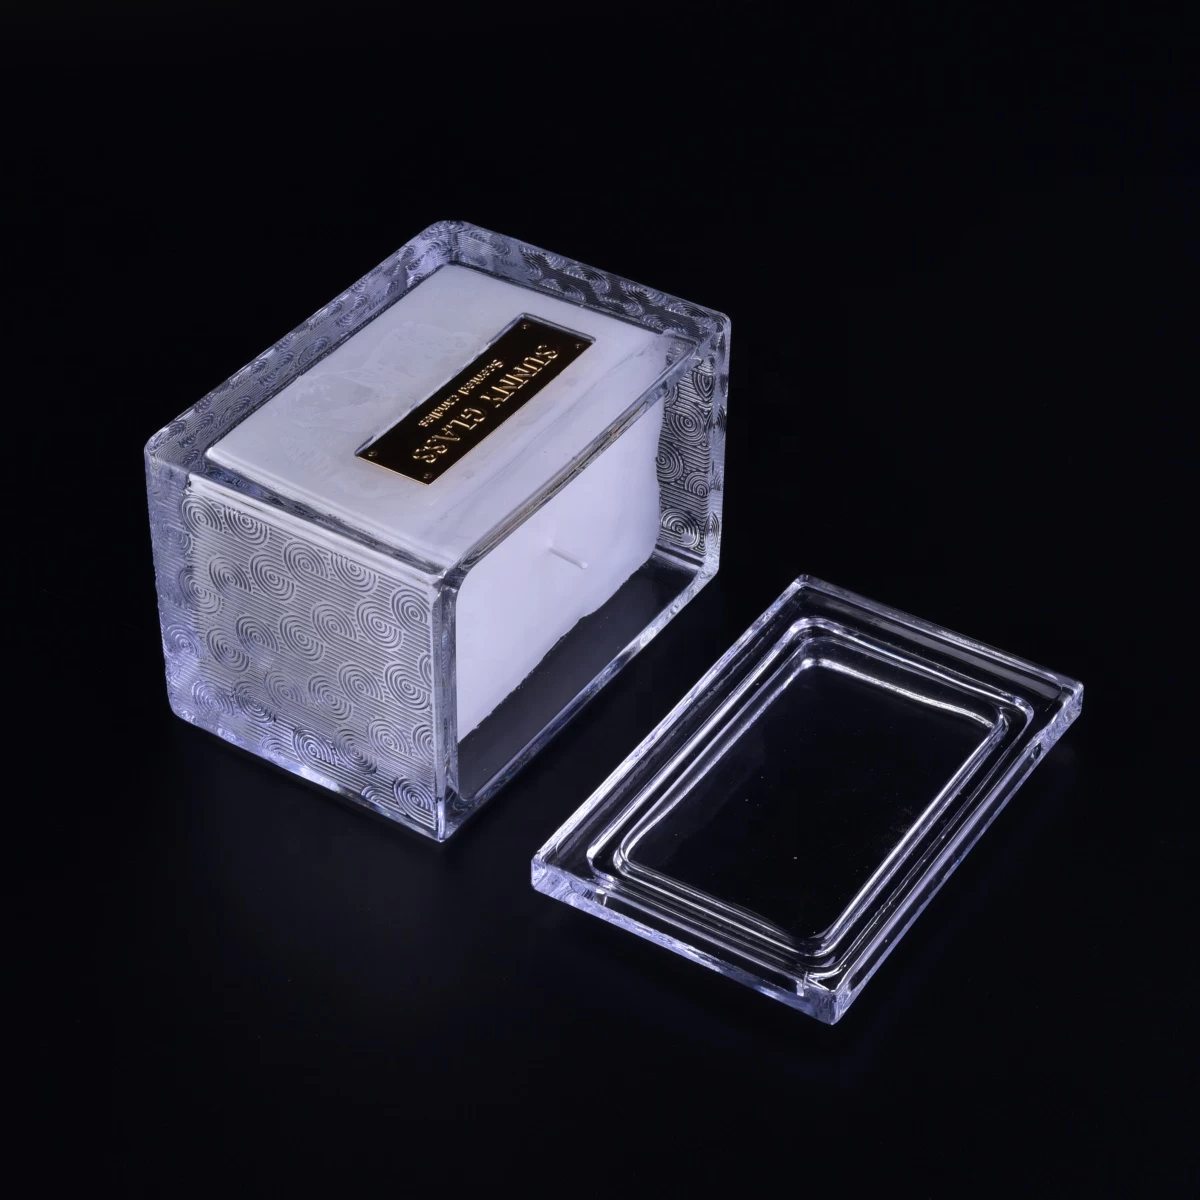 Sunny luxury custom crystal scented square glass candle holder and lids